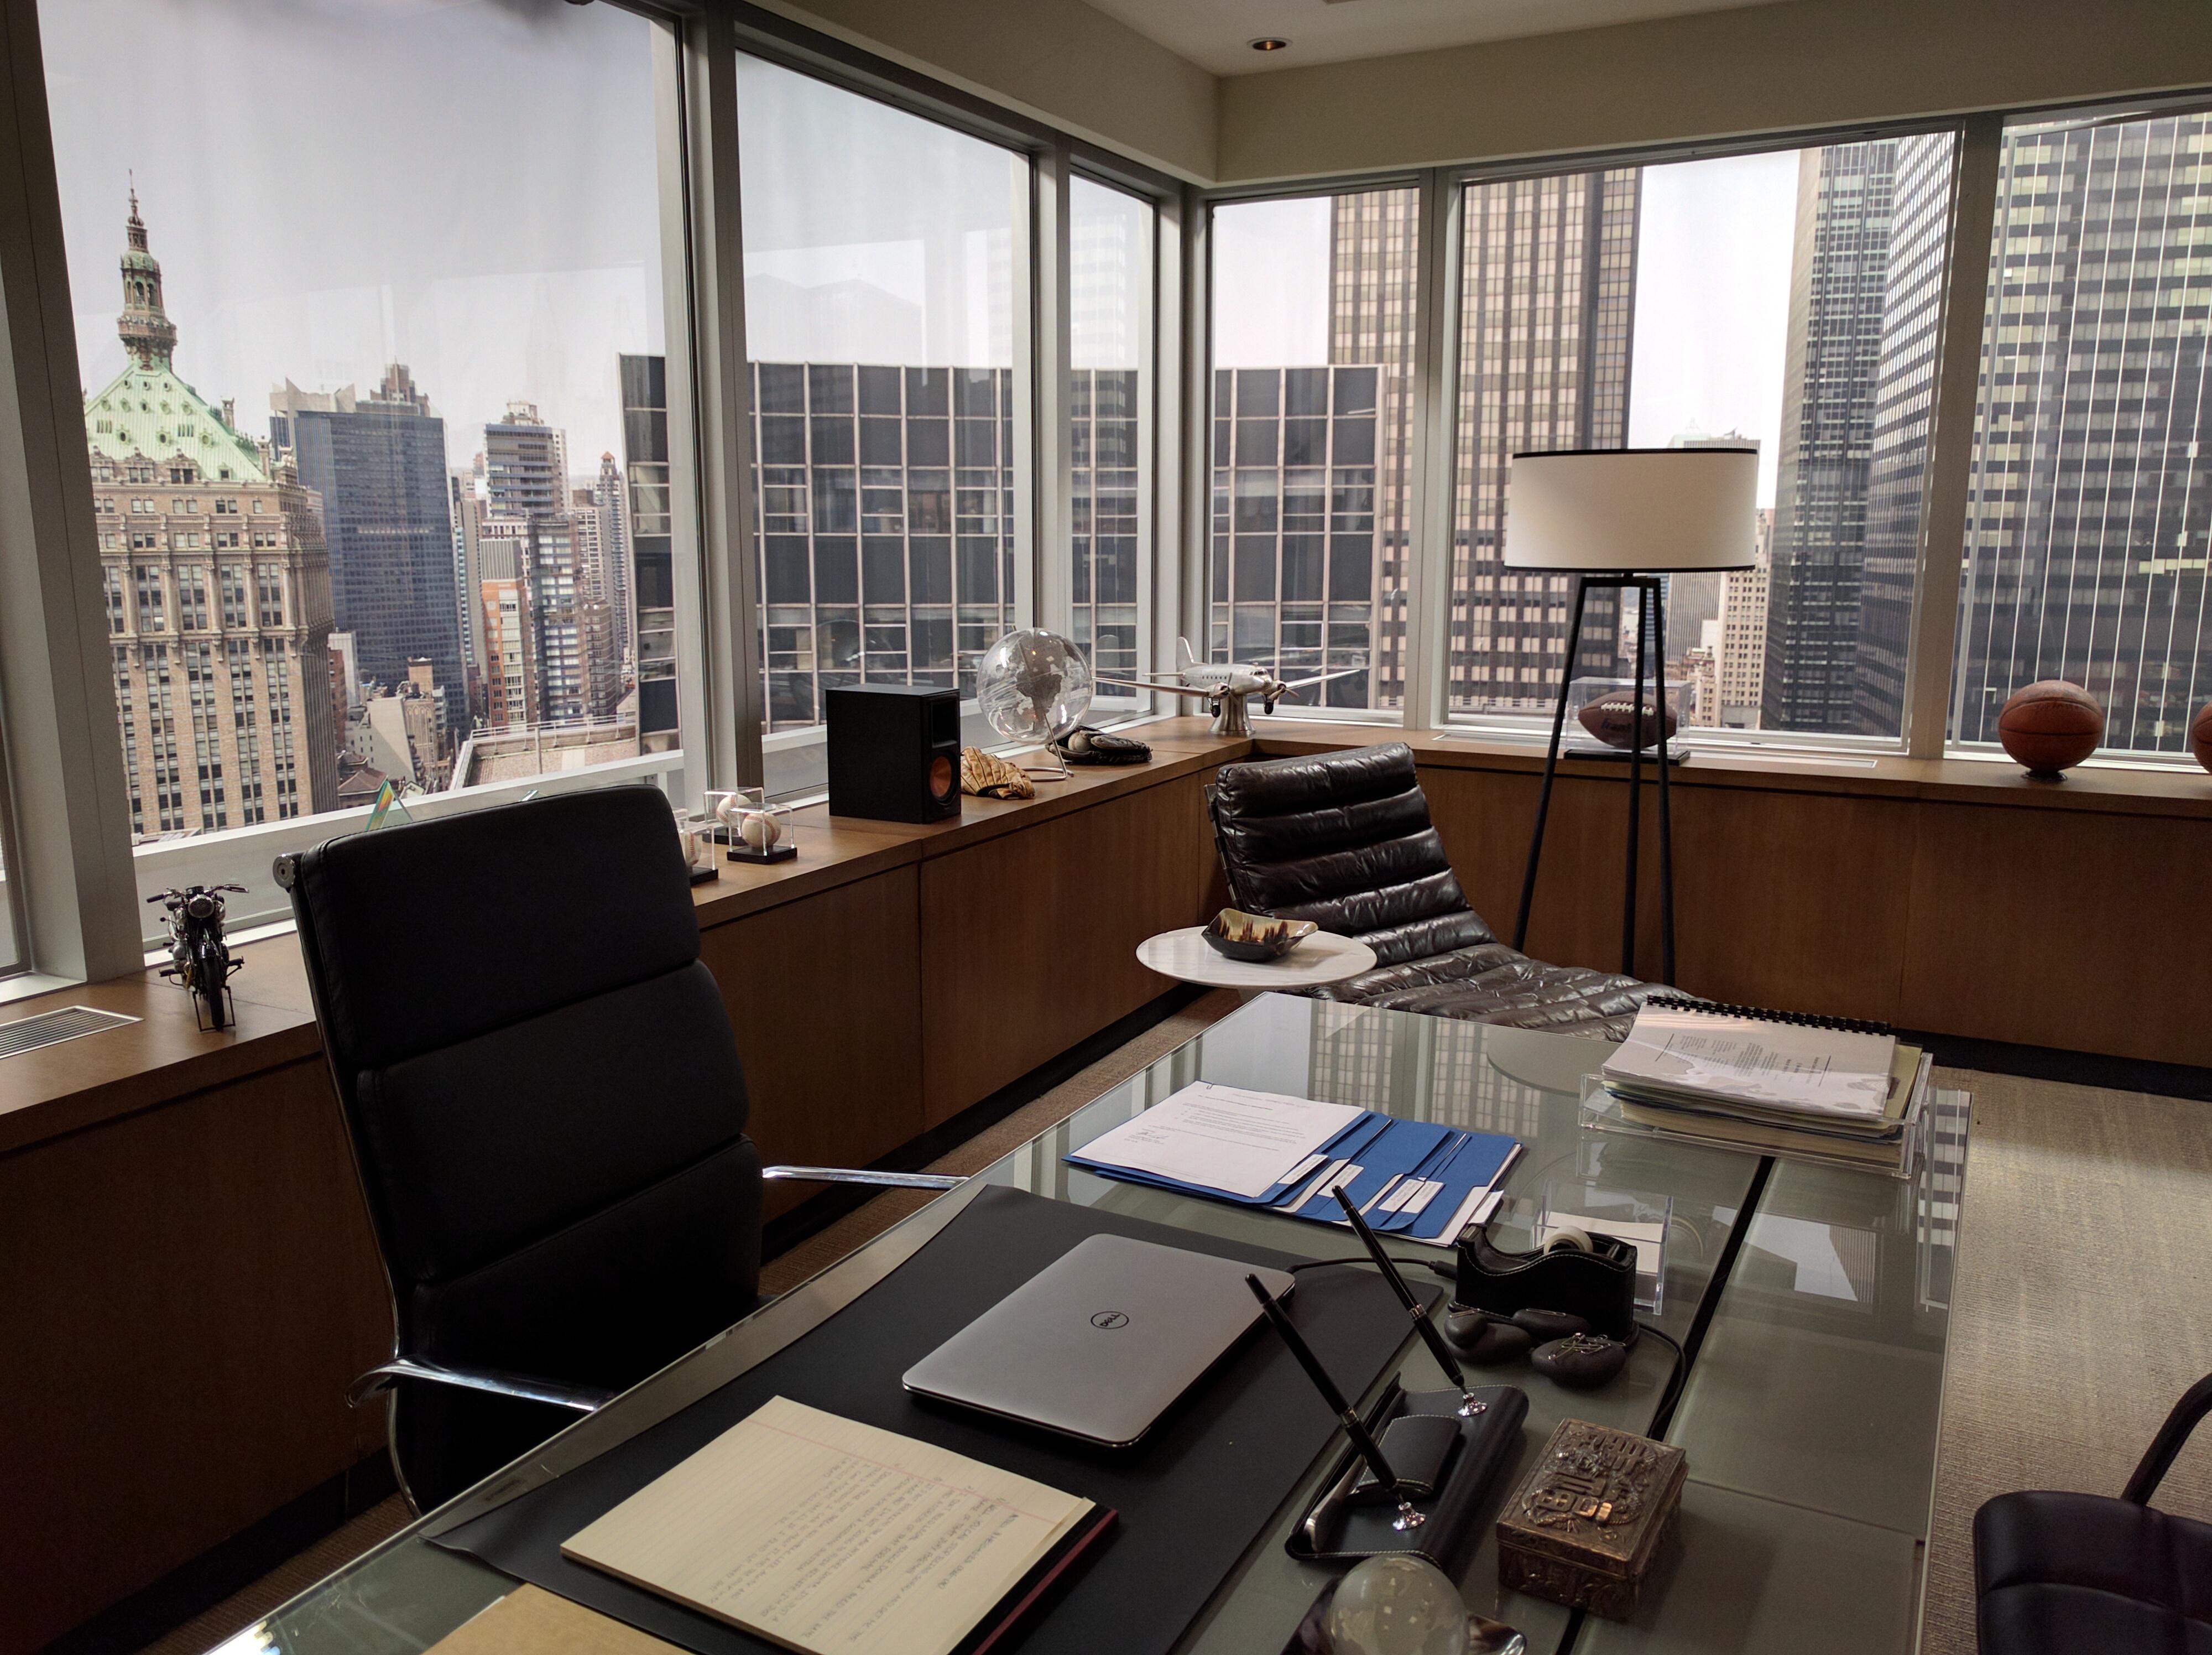 Suits - Harvey Specters office from Suits